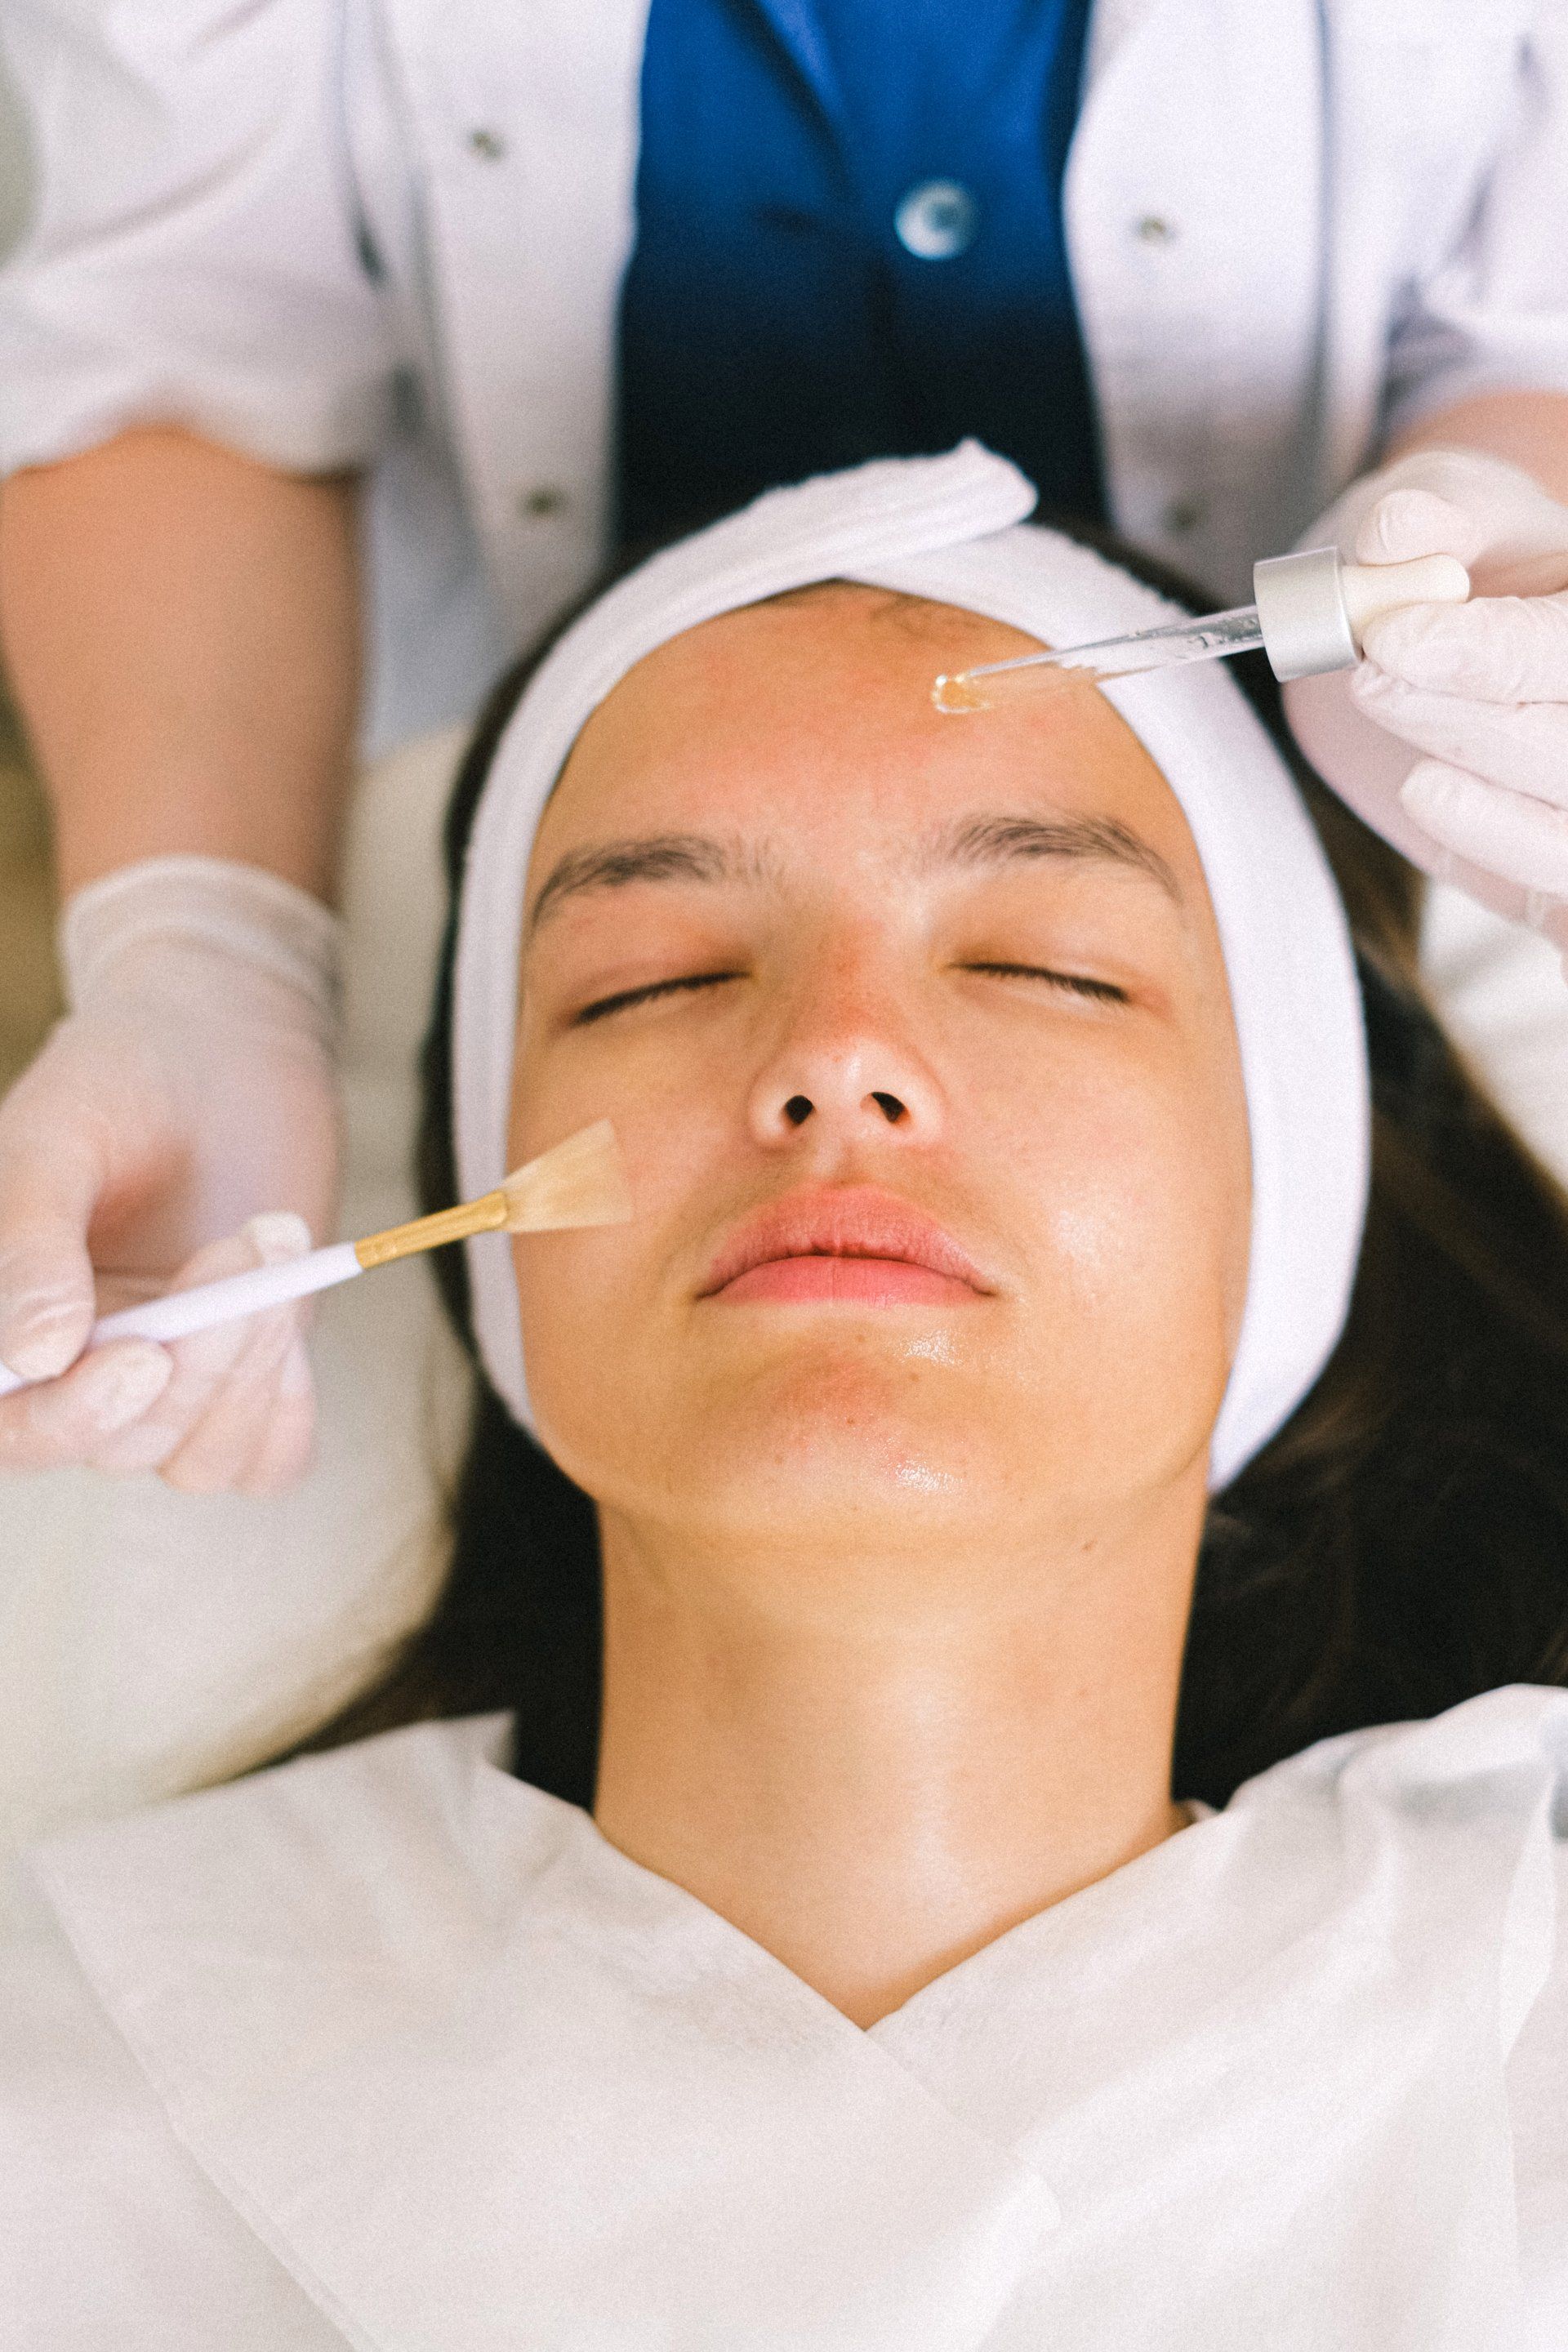 medical aesthetic specialist applies chemical peel solution to a female patient's face